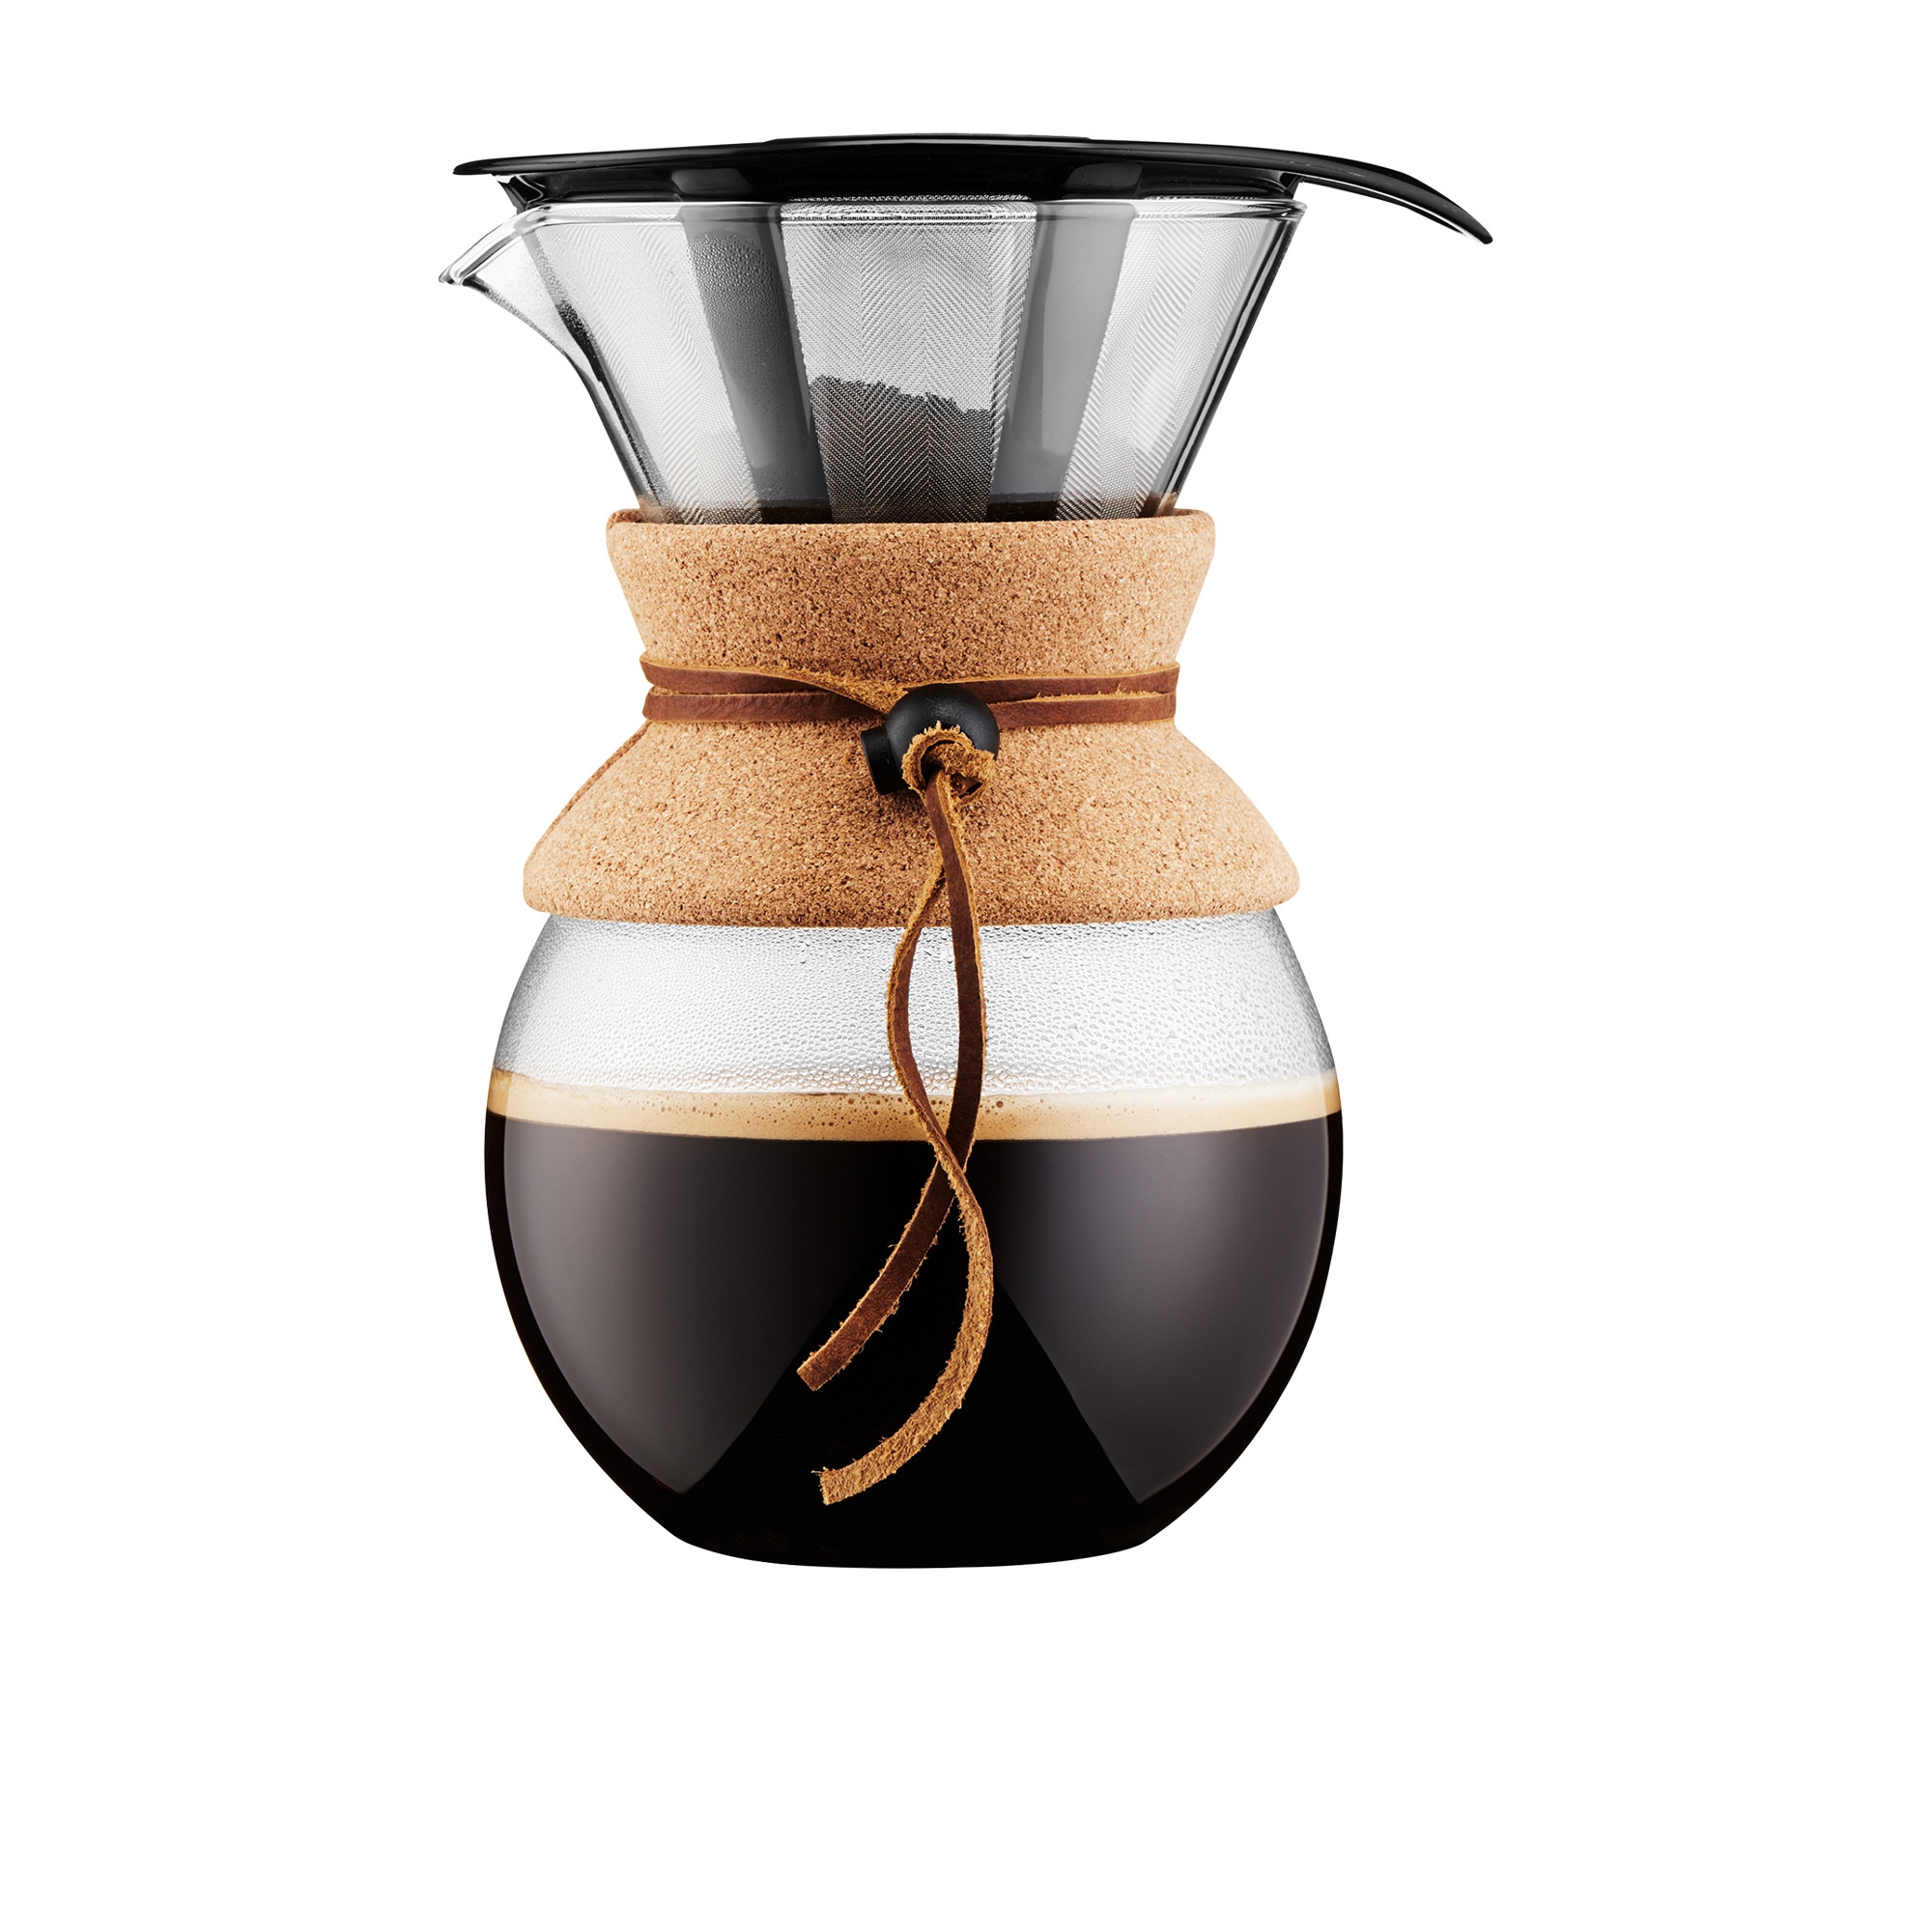 Bodum Pour Over Coffee Maker 8 Cup Image 1